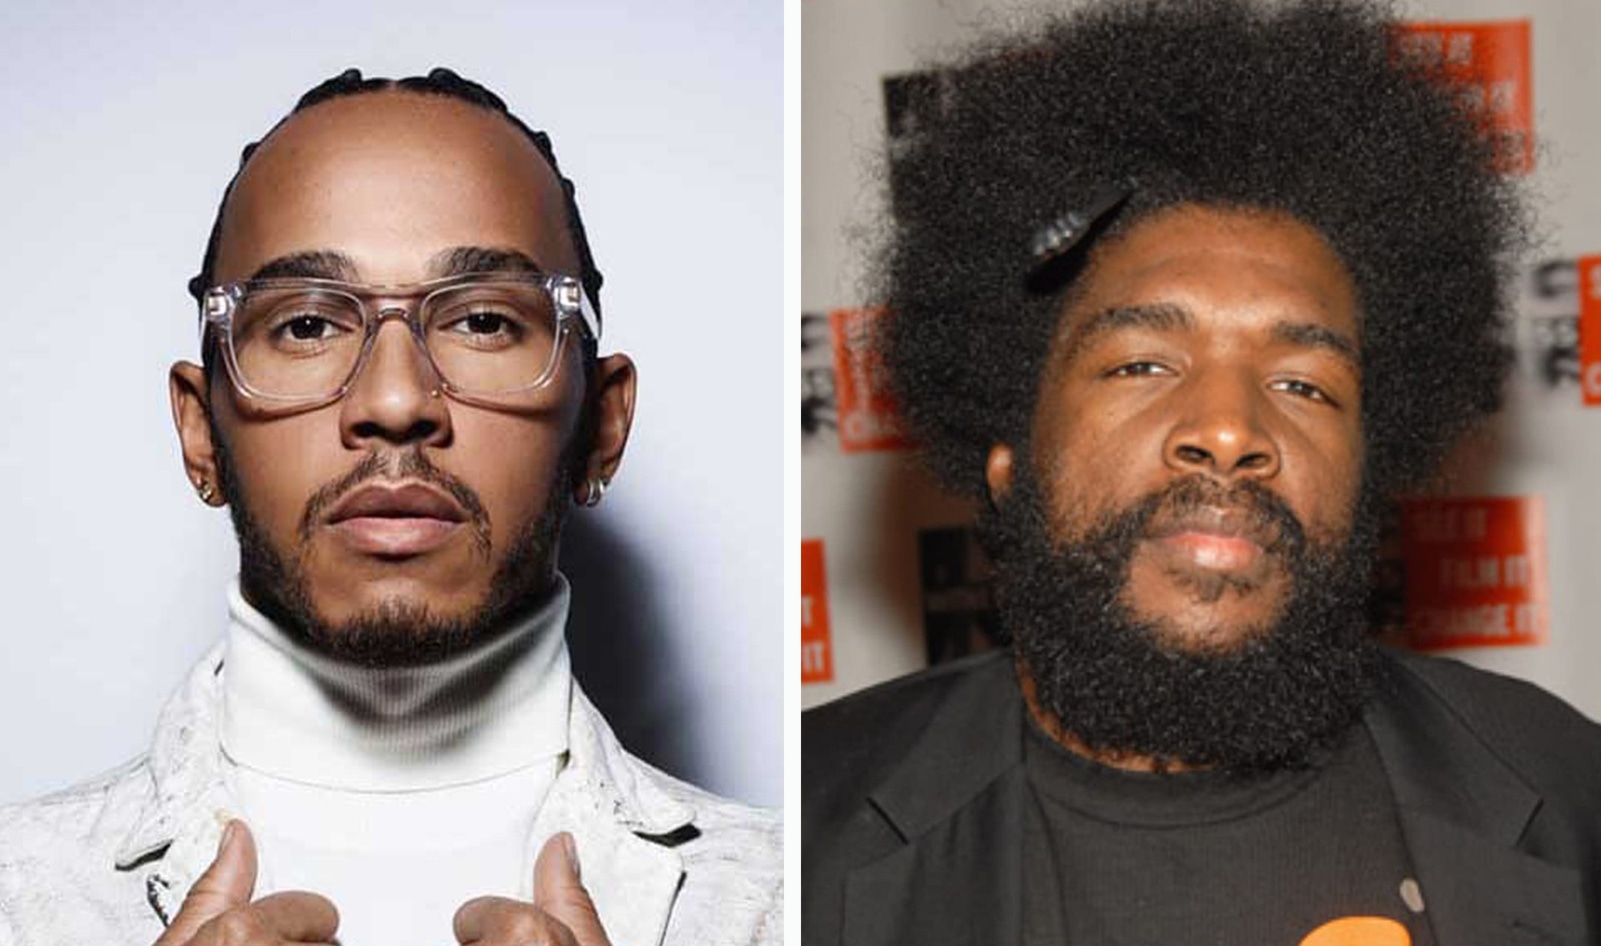 Questlove and Lewis Hamilton Join $235 Million Investment in Vegan Meat and Dairy Brand NotCo